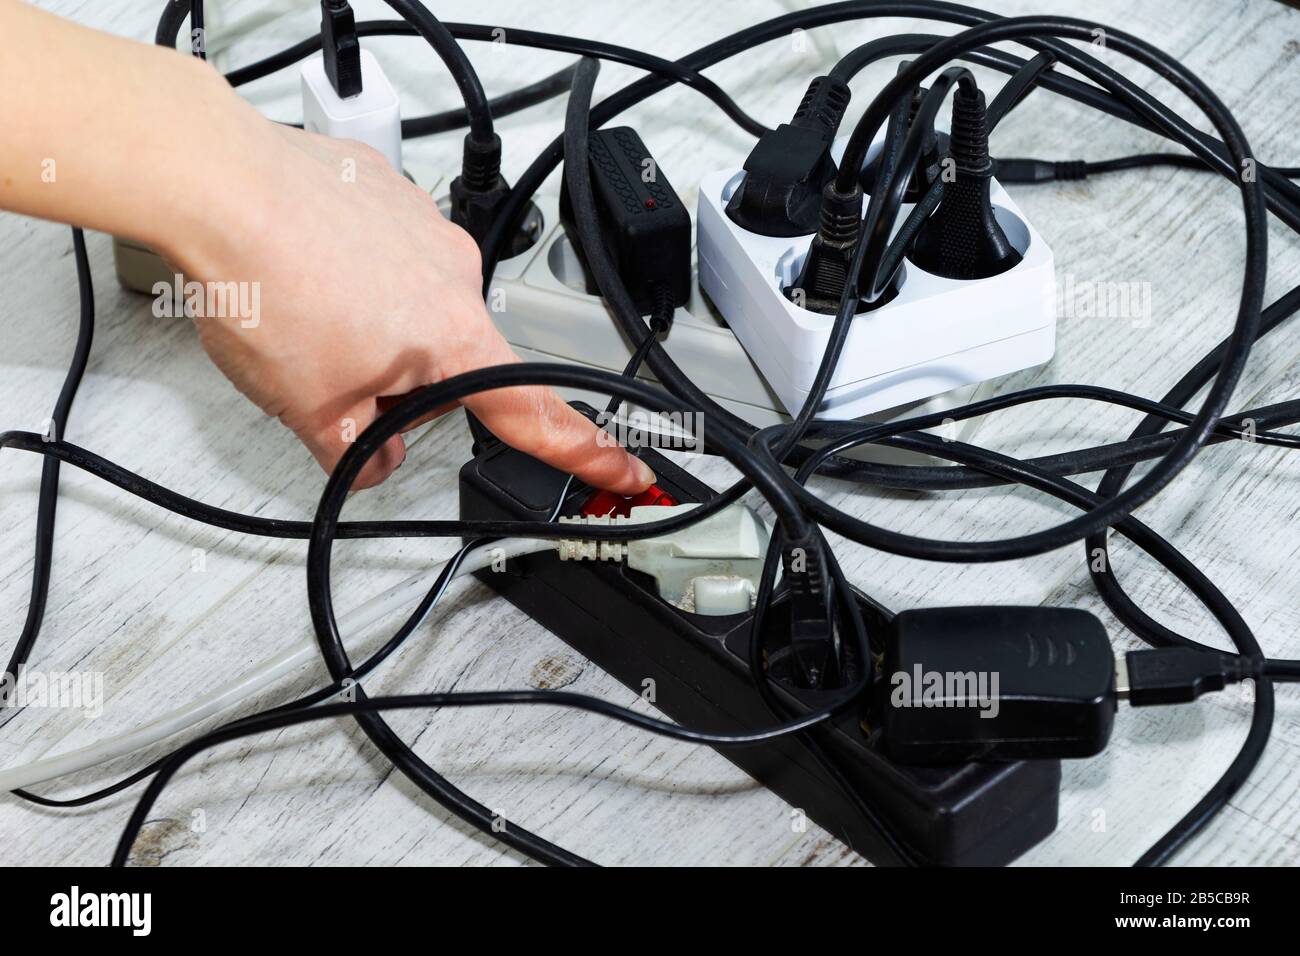 Lots of electrical outlets-enabled devices. Power saving. Stock Photo